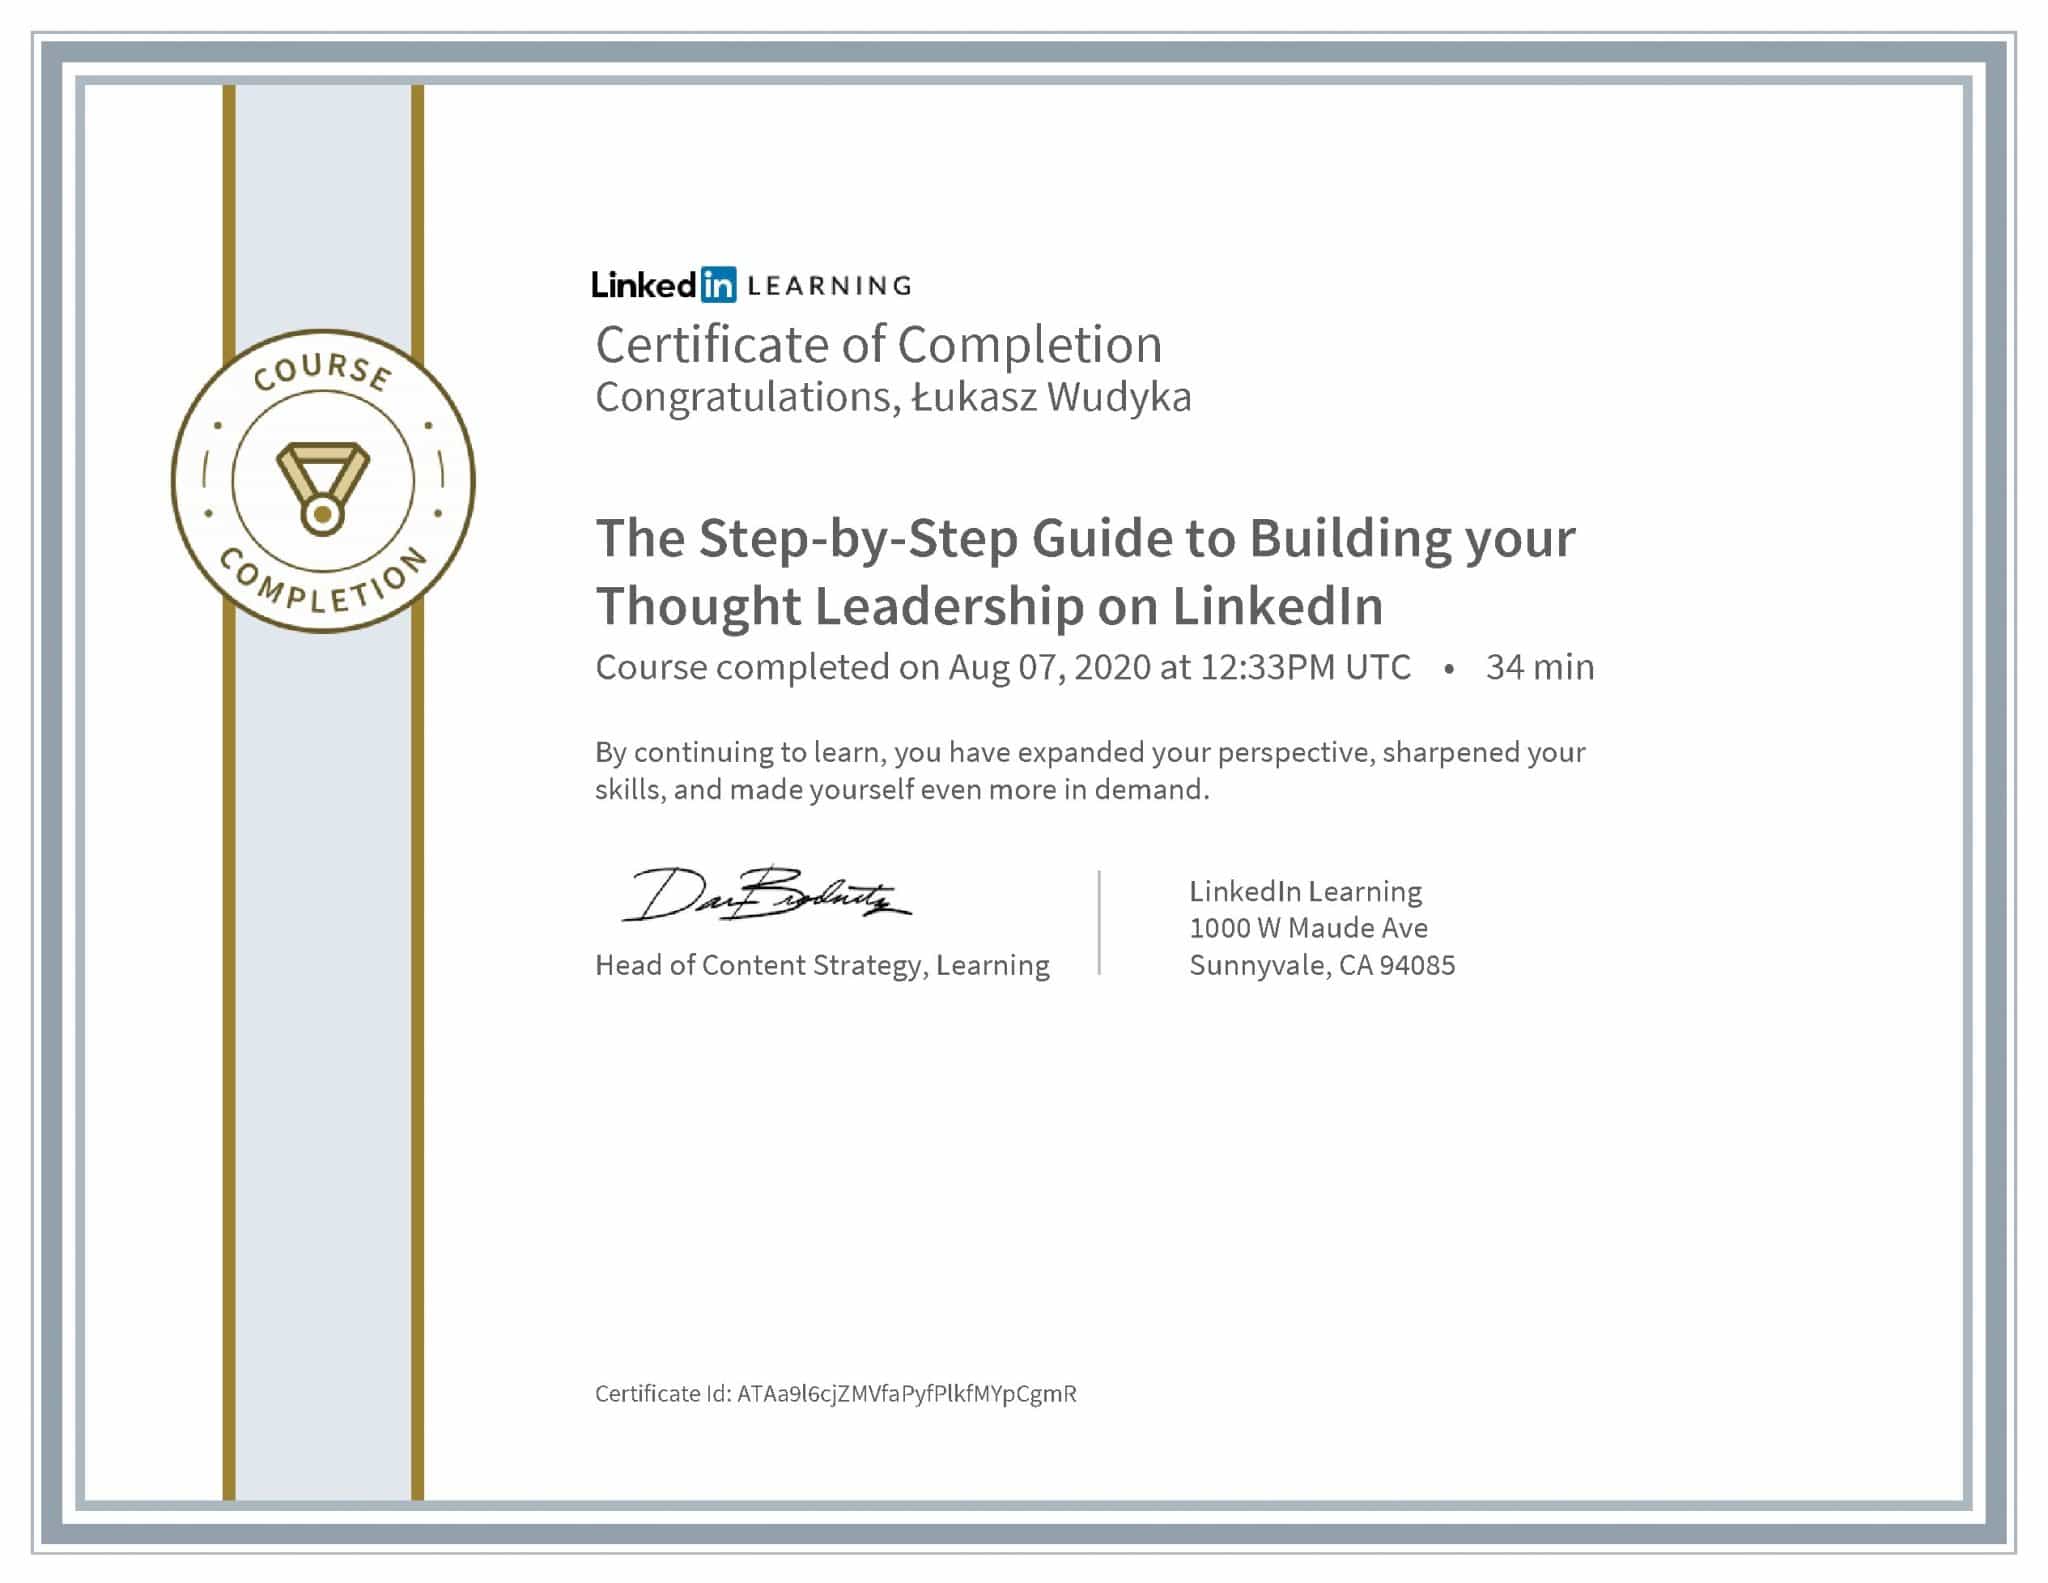 Łukasz Wudyka certyfikat LinkedIn The Step-by-Step Guide to Building your Thought Leadership on LinkedIn